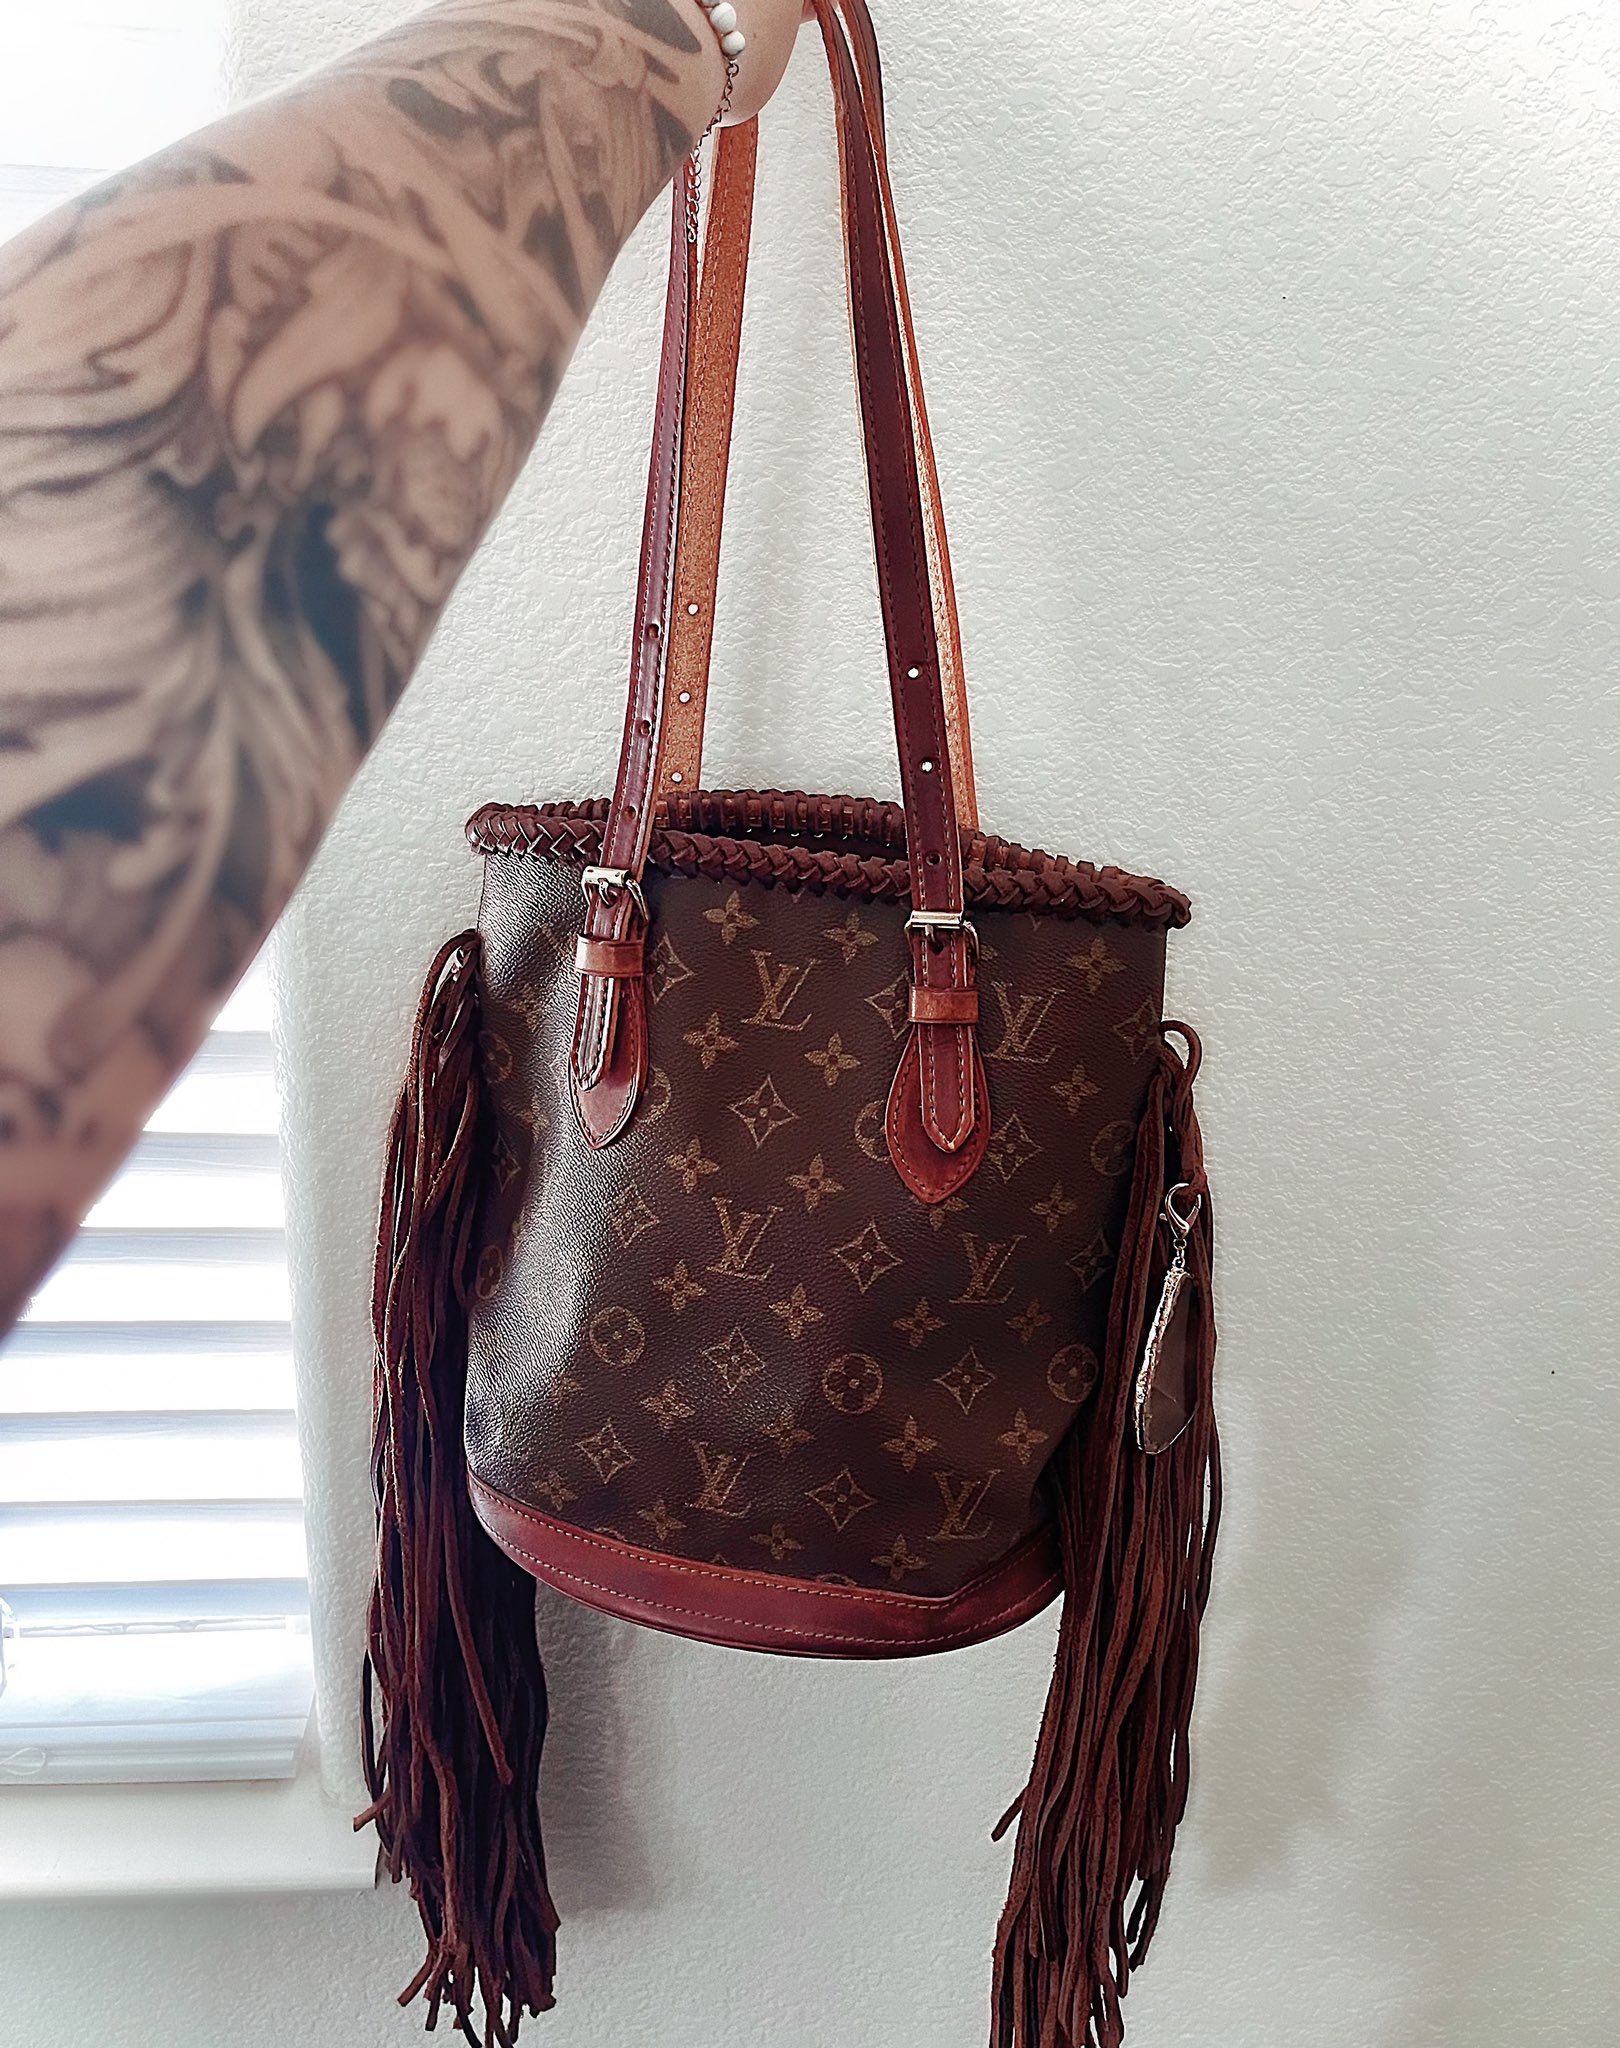 Authentic Louis Vuitton Upcycled bag